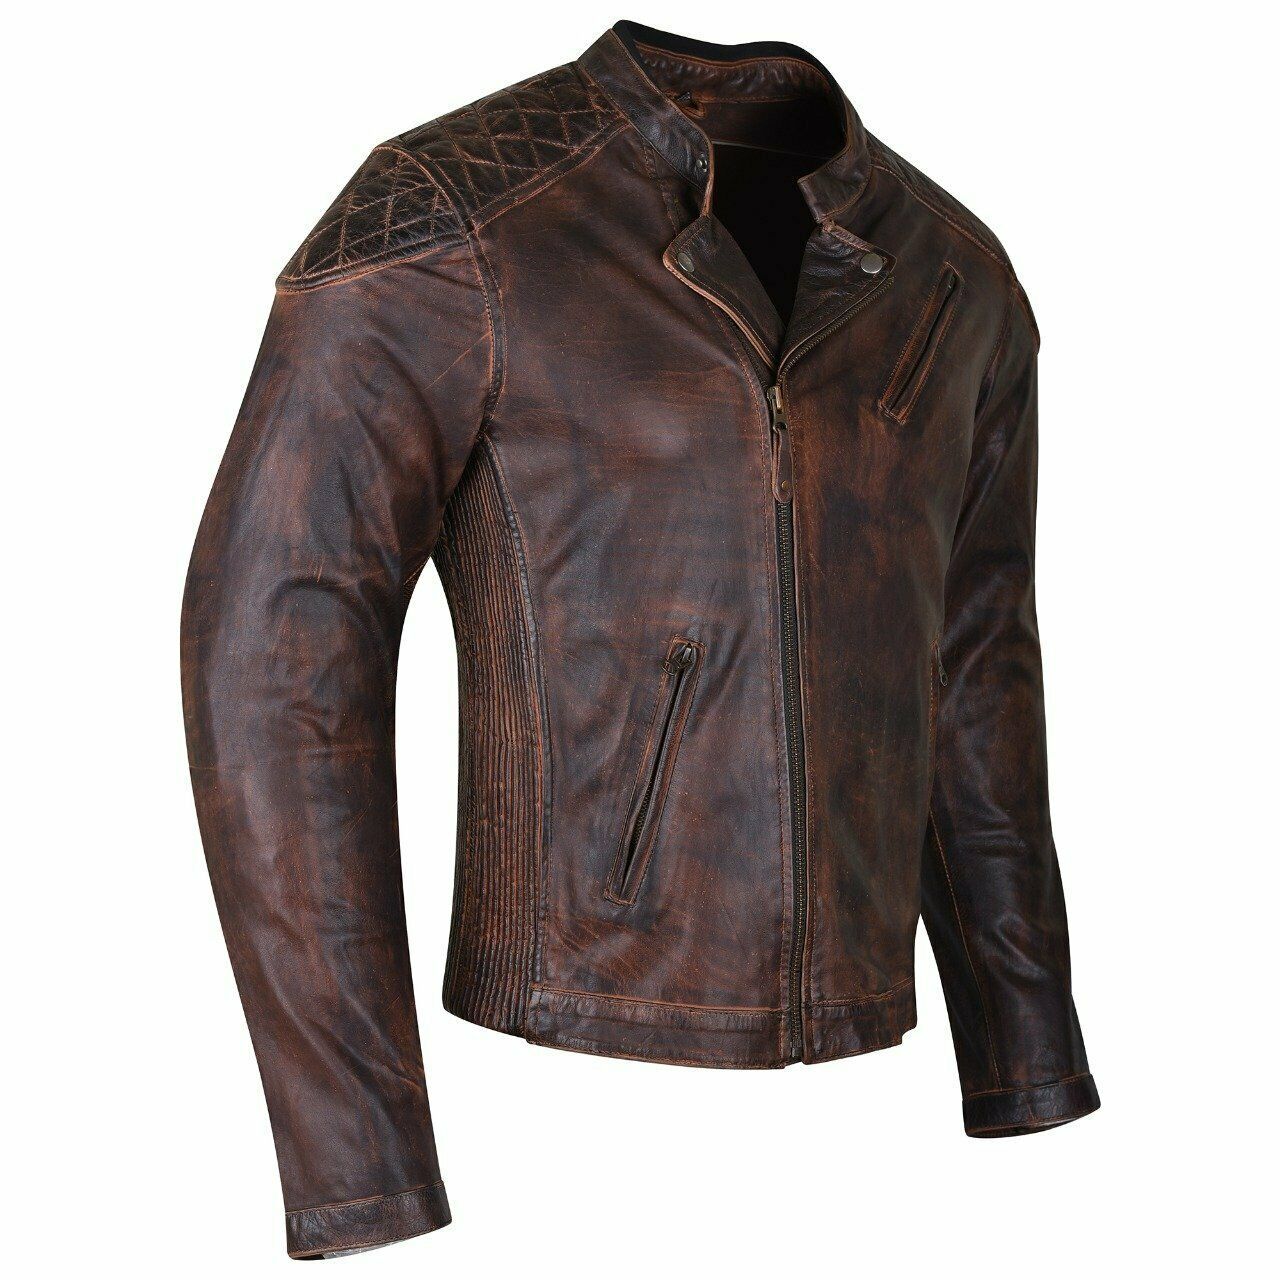 Men's Vintage Brown Leather Jacket with Diamond Stitched Shoulders